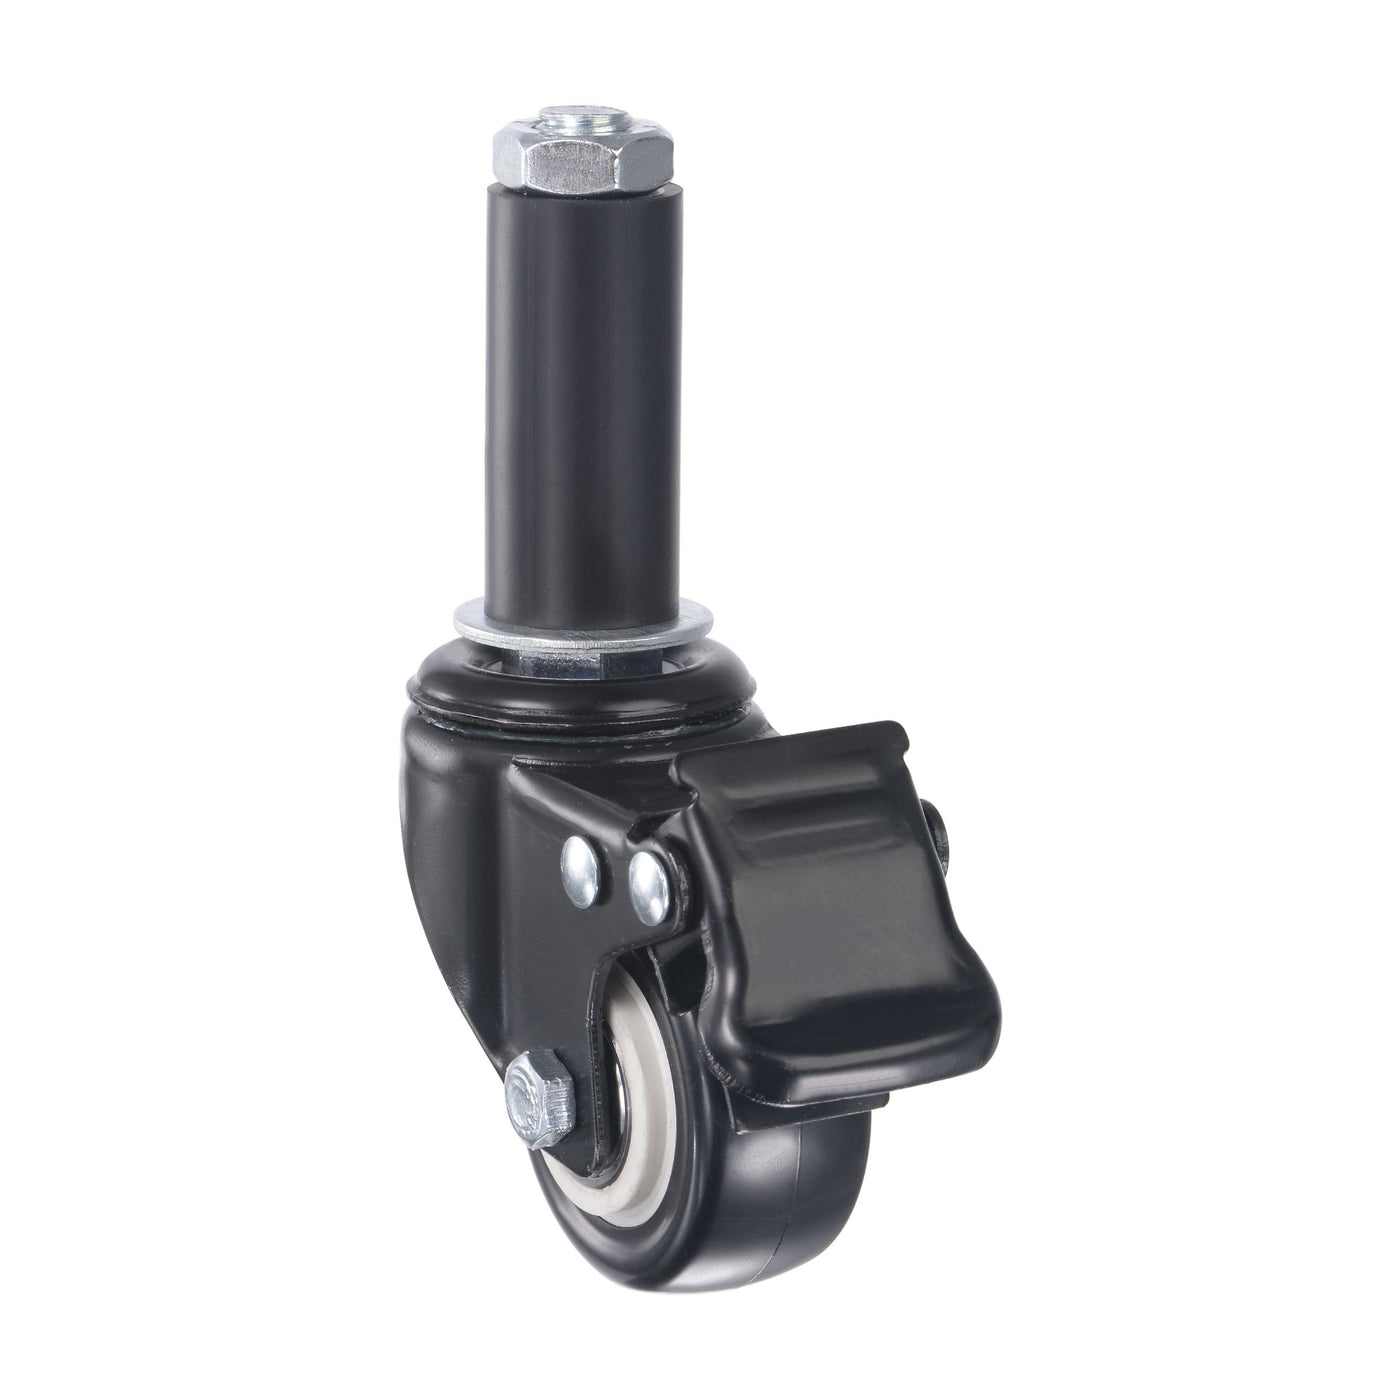 uxcell Uxcell Swivel Expanding Stem Caster with Brake Diameter Load Capacity, for Kitchen Prep Tables, PVC